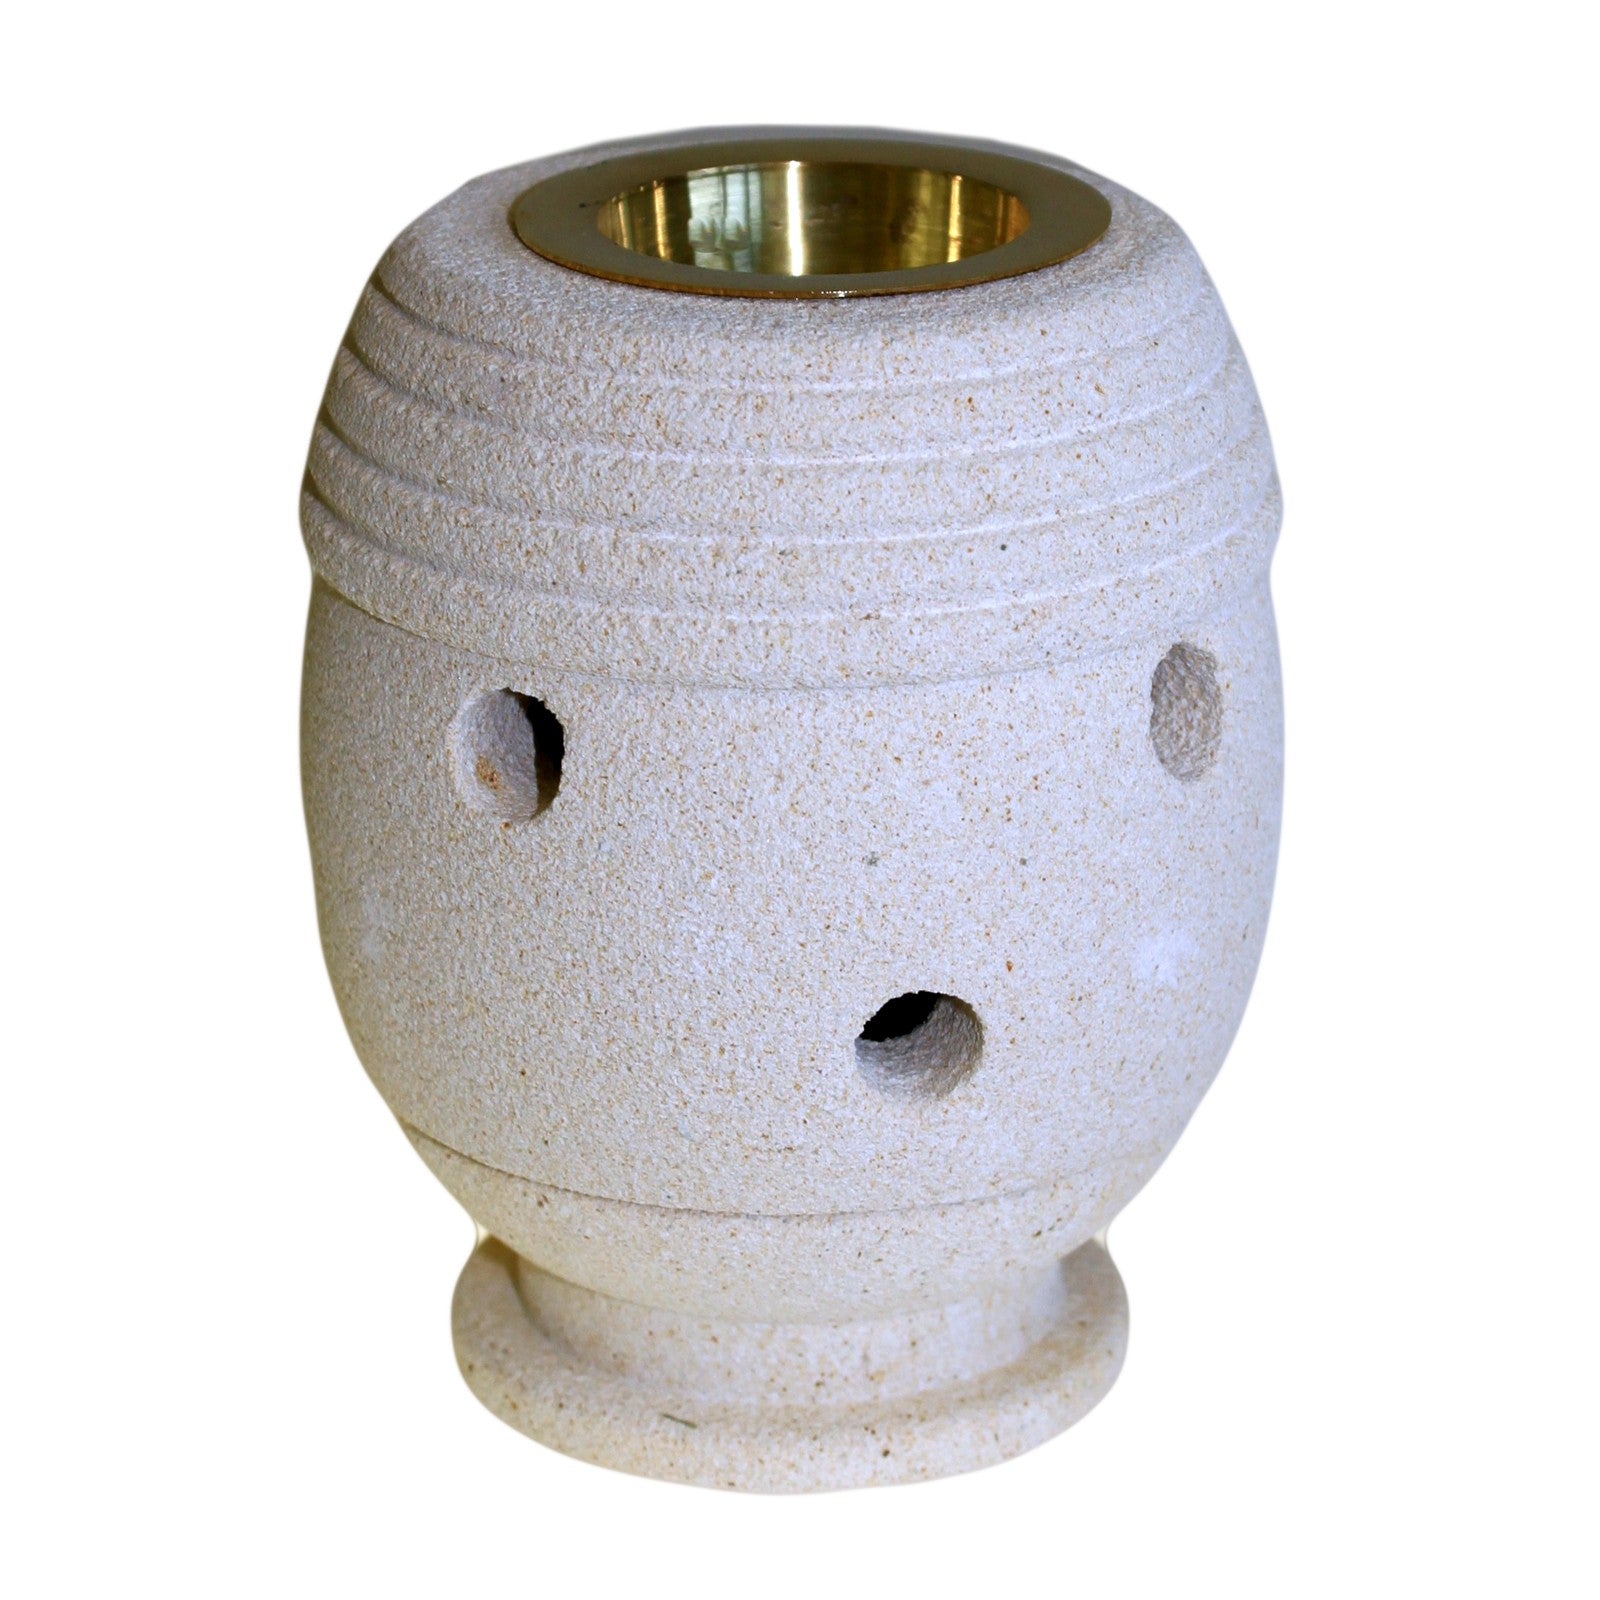 View Stone Oil Burner Classic information